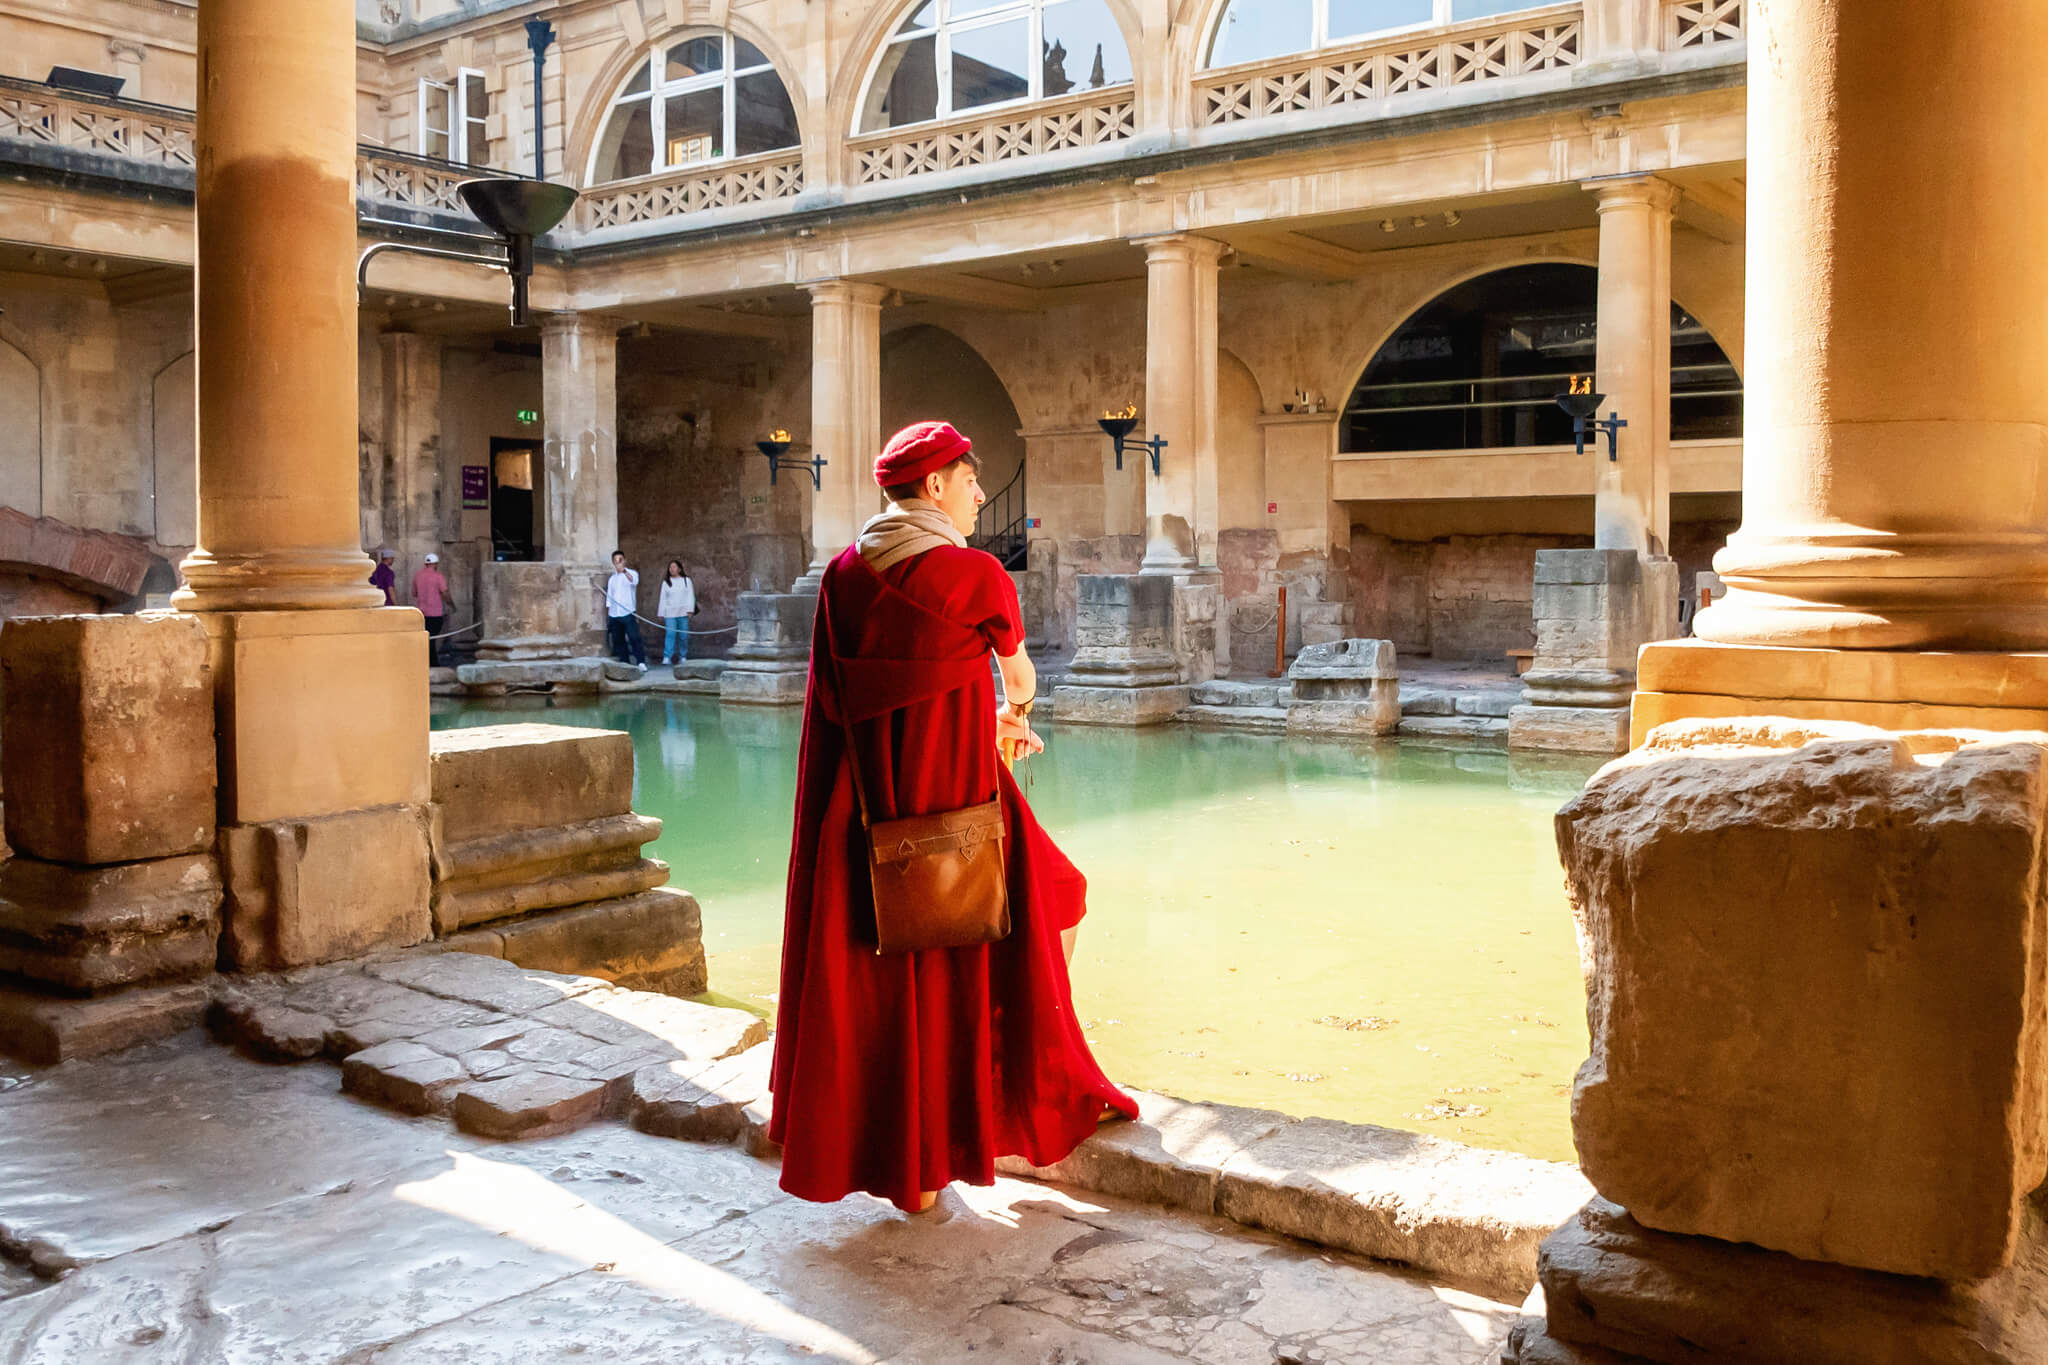 A Man dressed up in Roman garb at the ancient baths in Bath UK